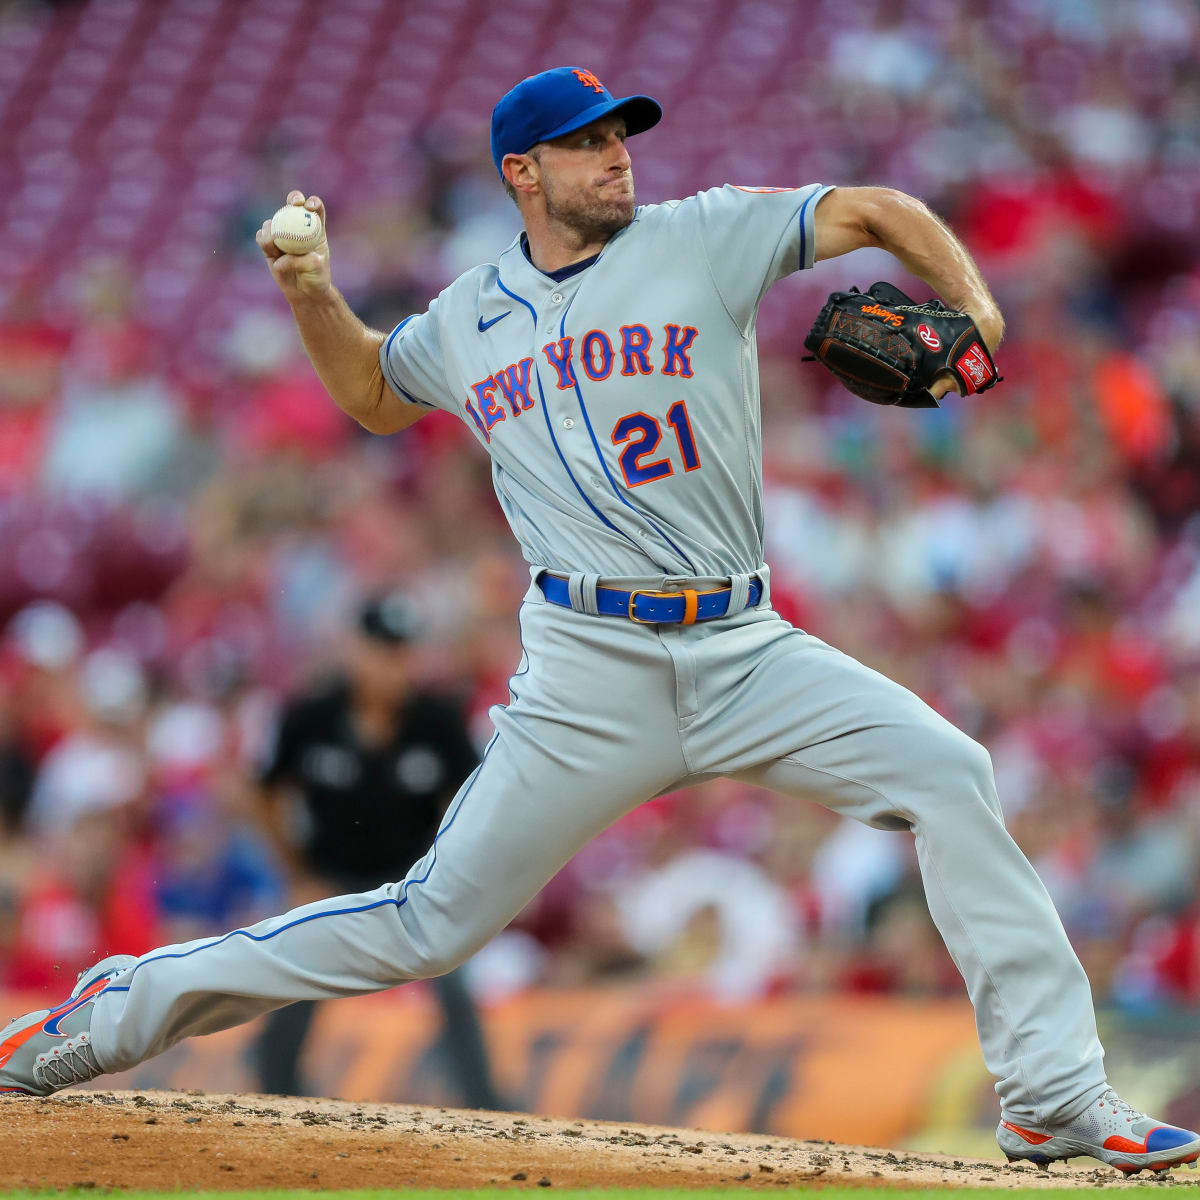 Mets star pitcher Scherzer facing six to eight weeks out - AS USA